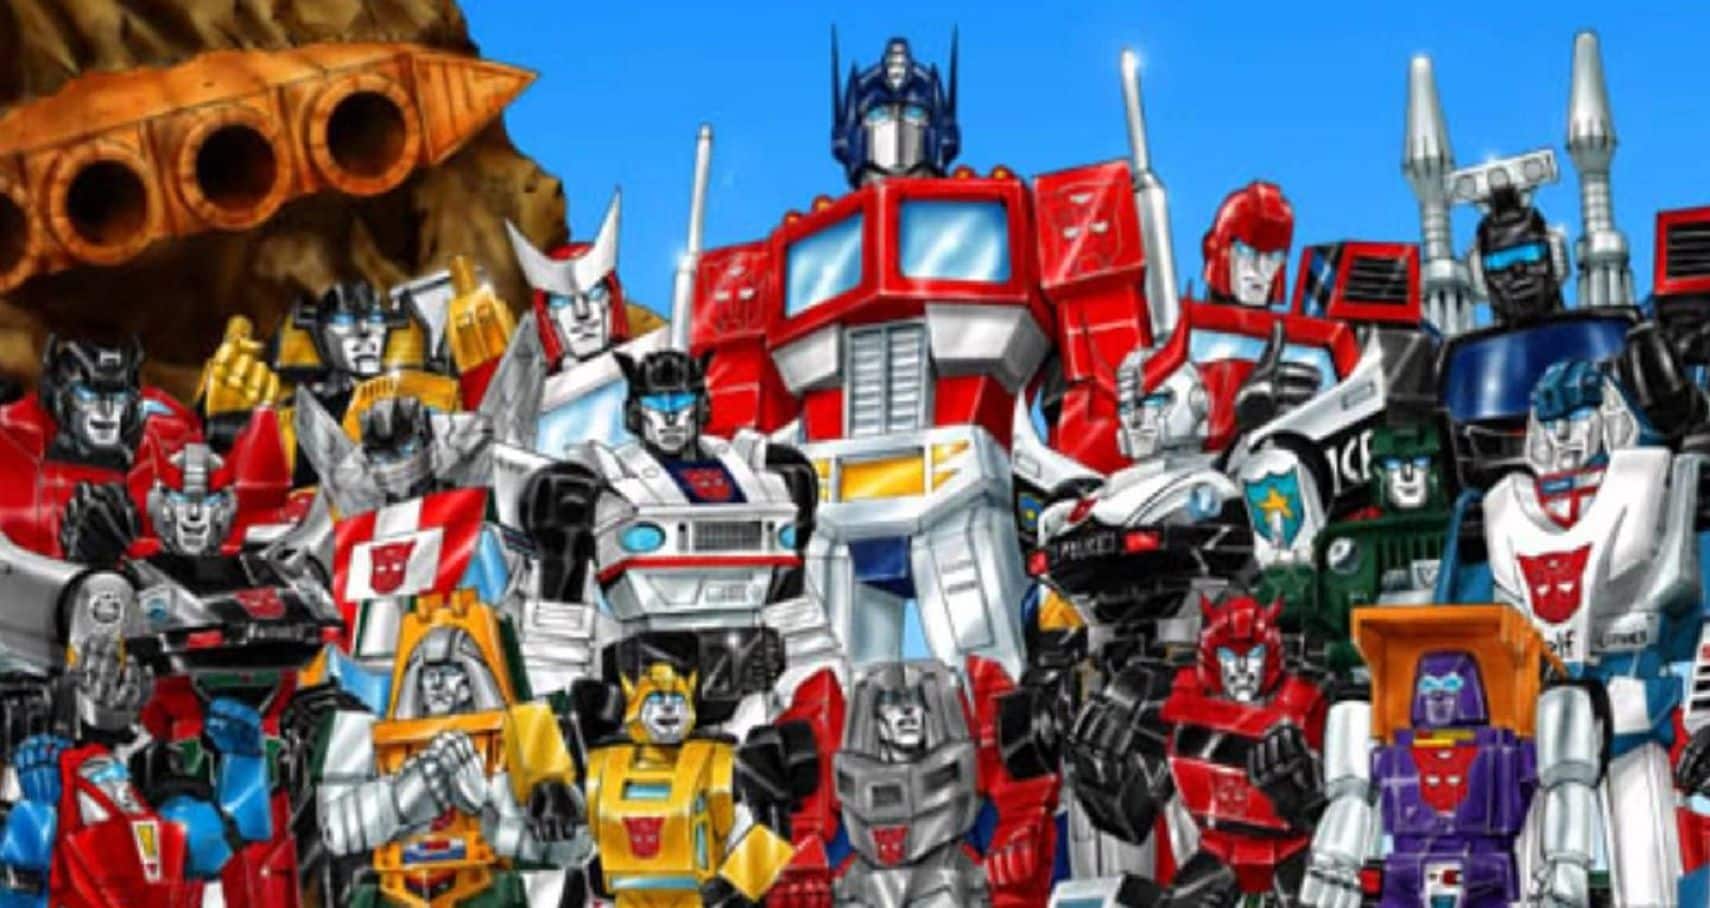 Transformers Animated Prequel Film Lands The Toy Story 4 Director